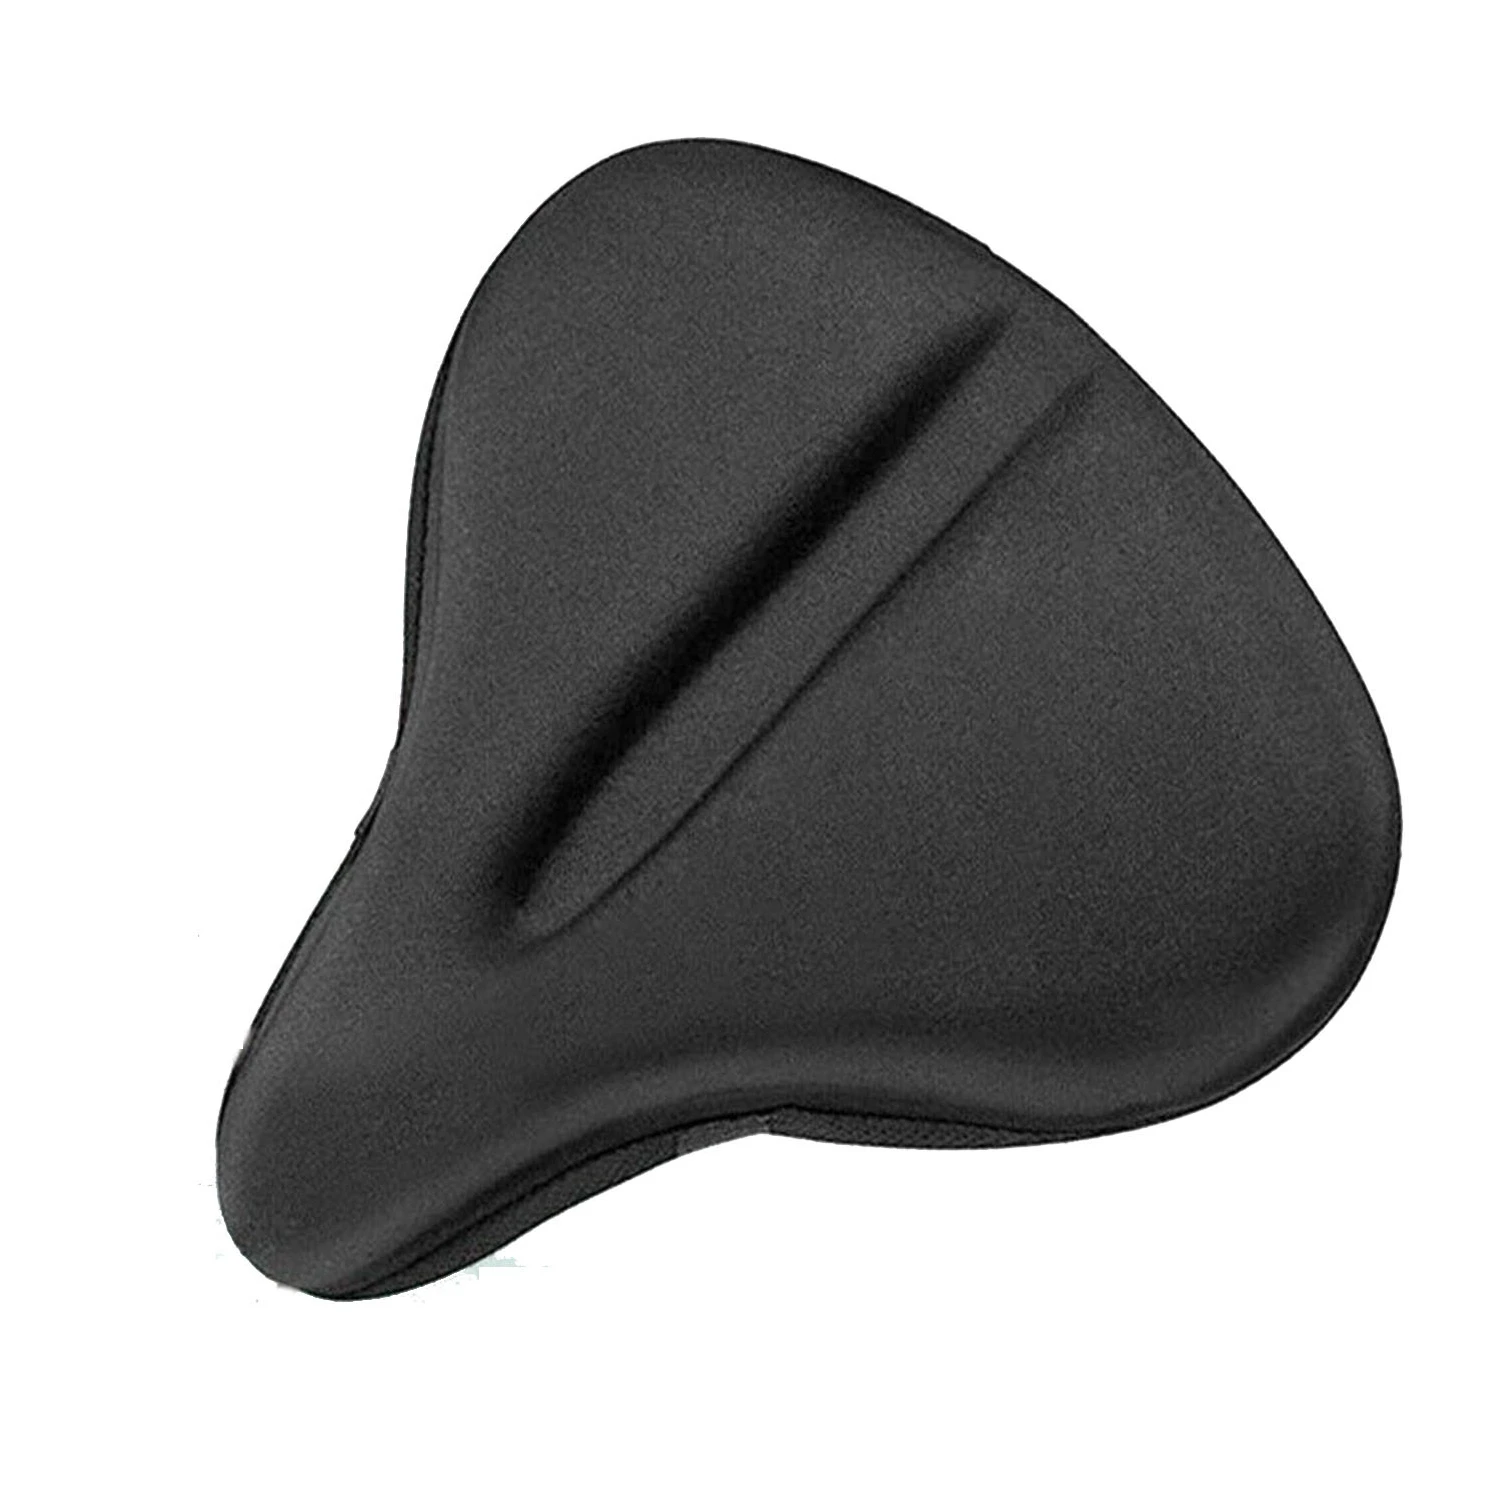 Bicycle Parts Saddle Outdoor Cycling Mtb Bike Seat Shock-proof Comfortable X-WIDE Bicycle Cushion with Cushion Cover